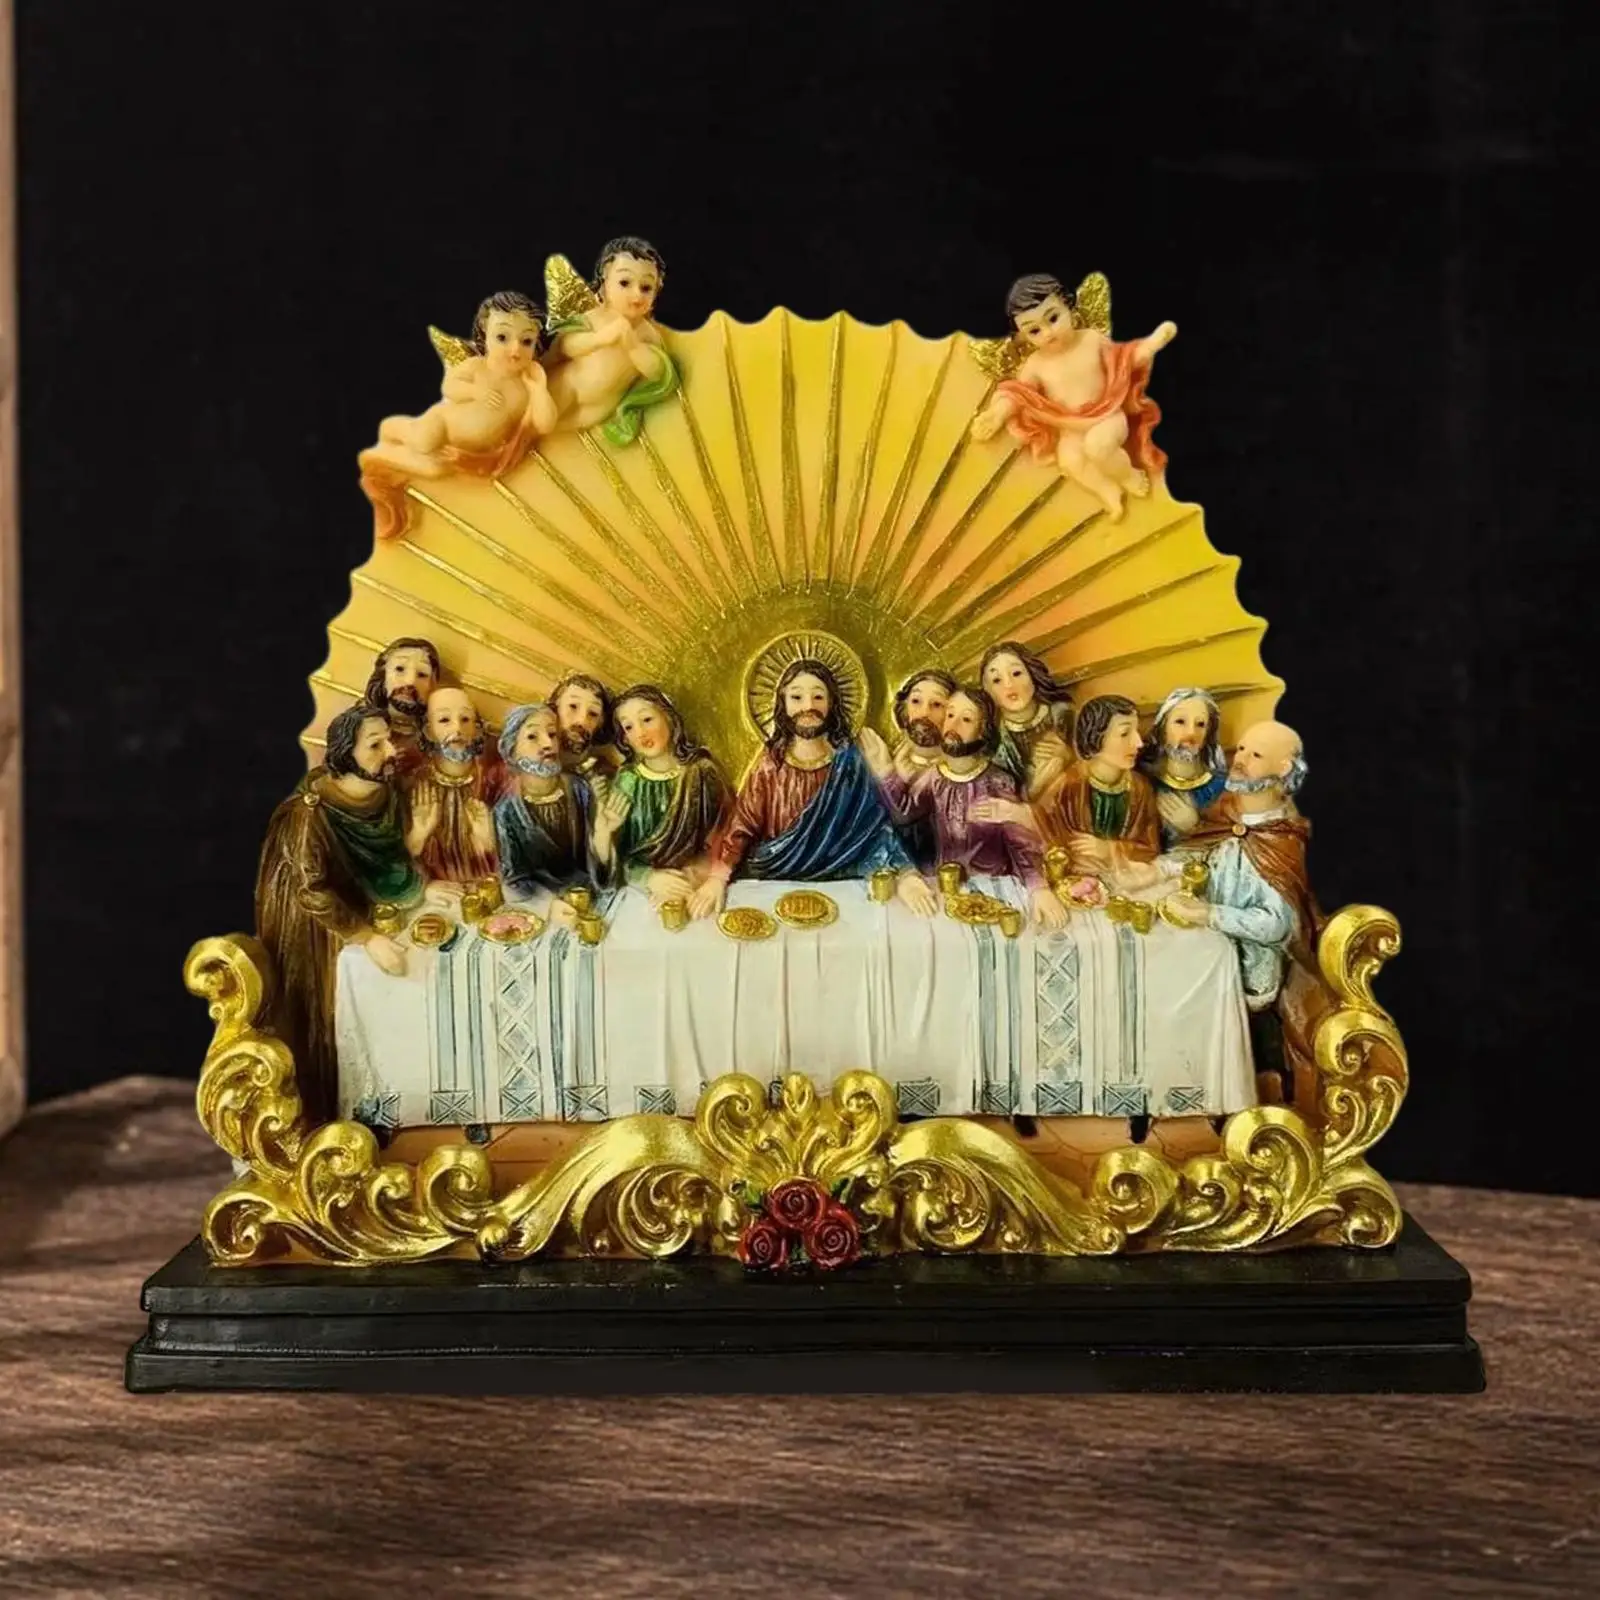 Resin Last Supper Sculpture Statue Home Decor Crafts Religious Statue Sculpture for Bedroom Home Living Room Office Decoration